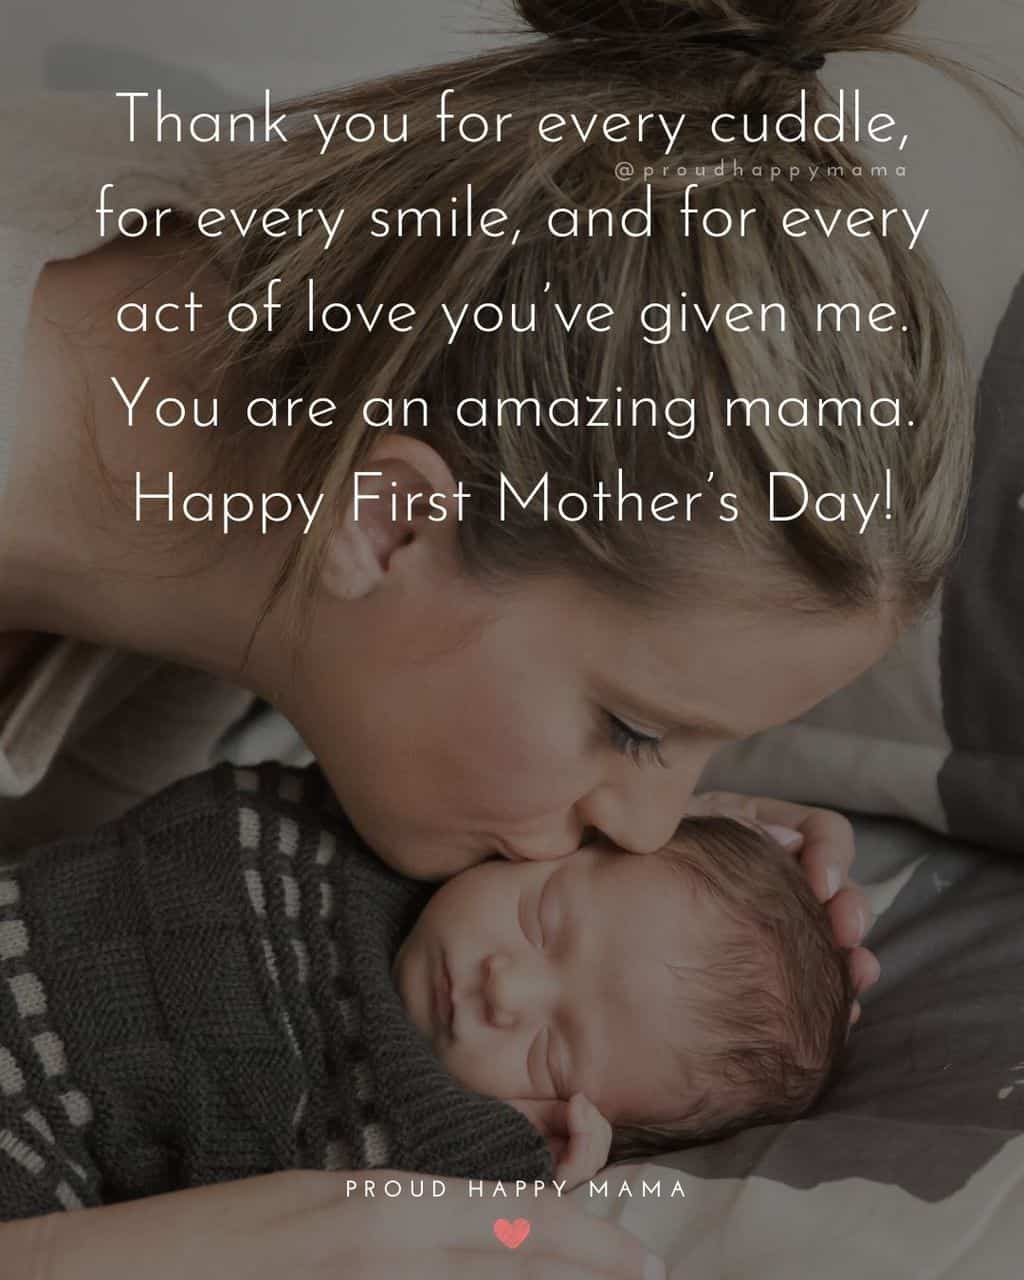 First Mothers Day Quotes - Thank you for every cuddle, for every smile, and for every act of love you’ve given me. You are an amazing